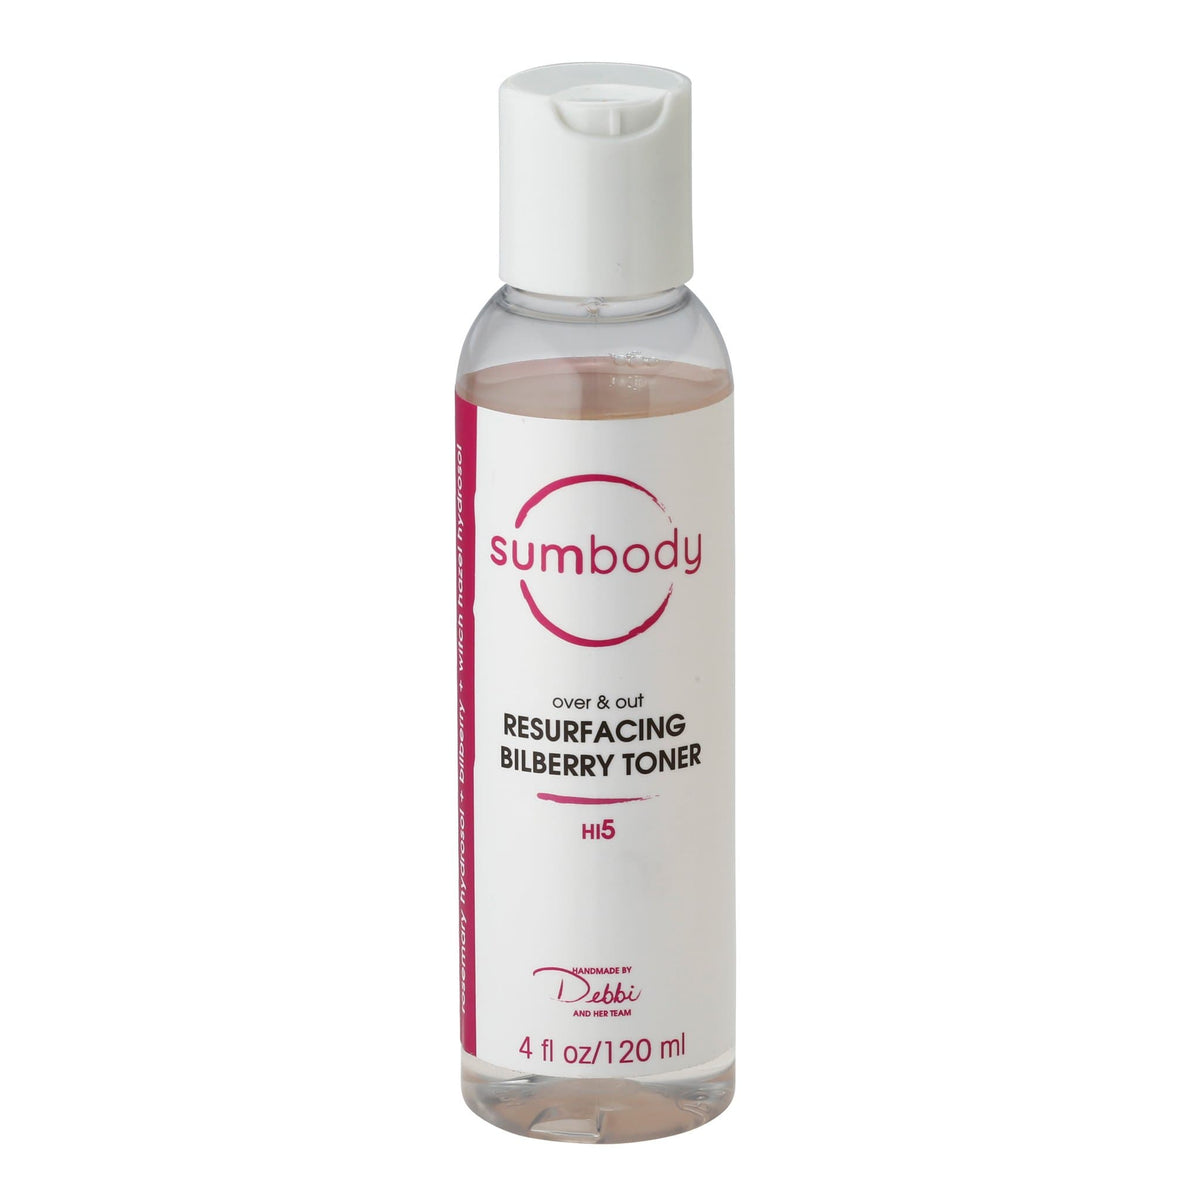 Over & Out Bilberry Resurfacing Toner by Sumbody Skincare